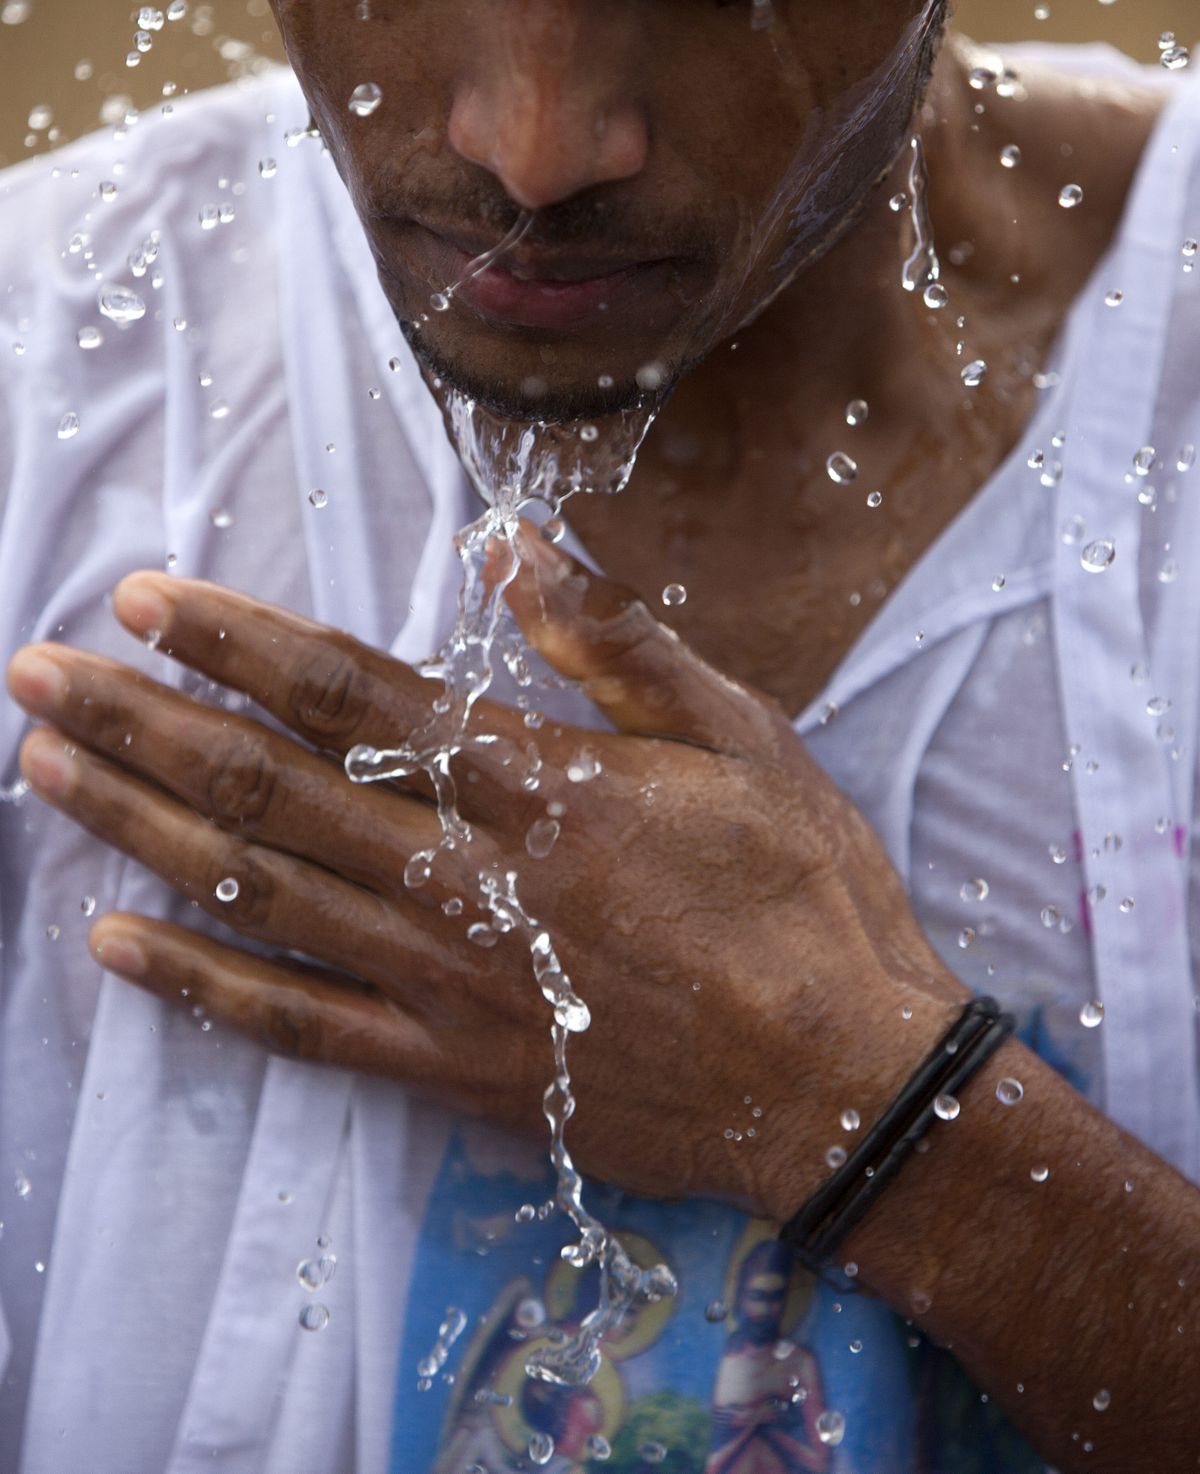 An ethiopian Orthodox Christian pilgrim immerses himself in water from the Jordan River after it was blessed during a baptism at Qasr al-Yahud, near where John the Baptist is said to have baptized Jesus. (Associated Press)